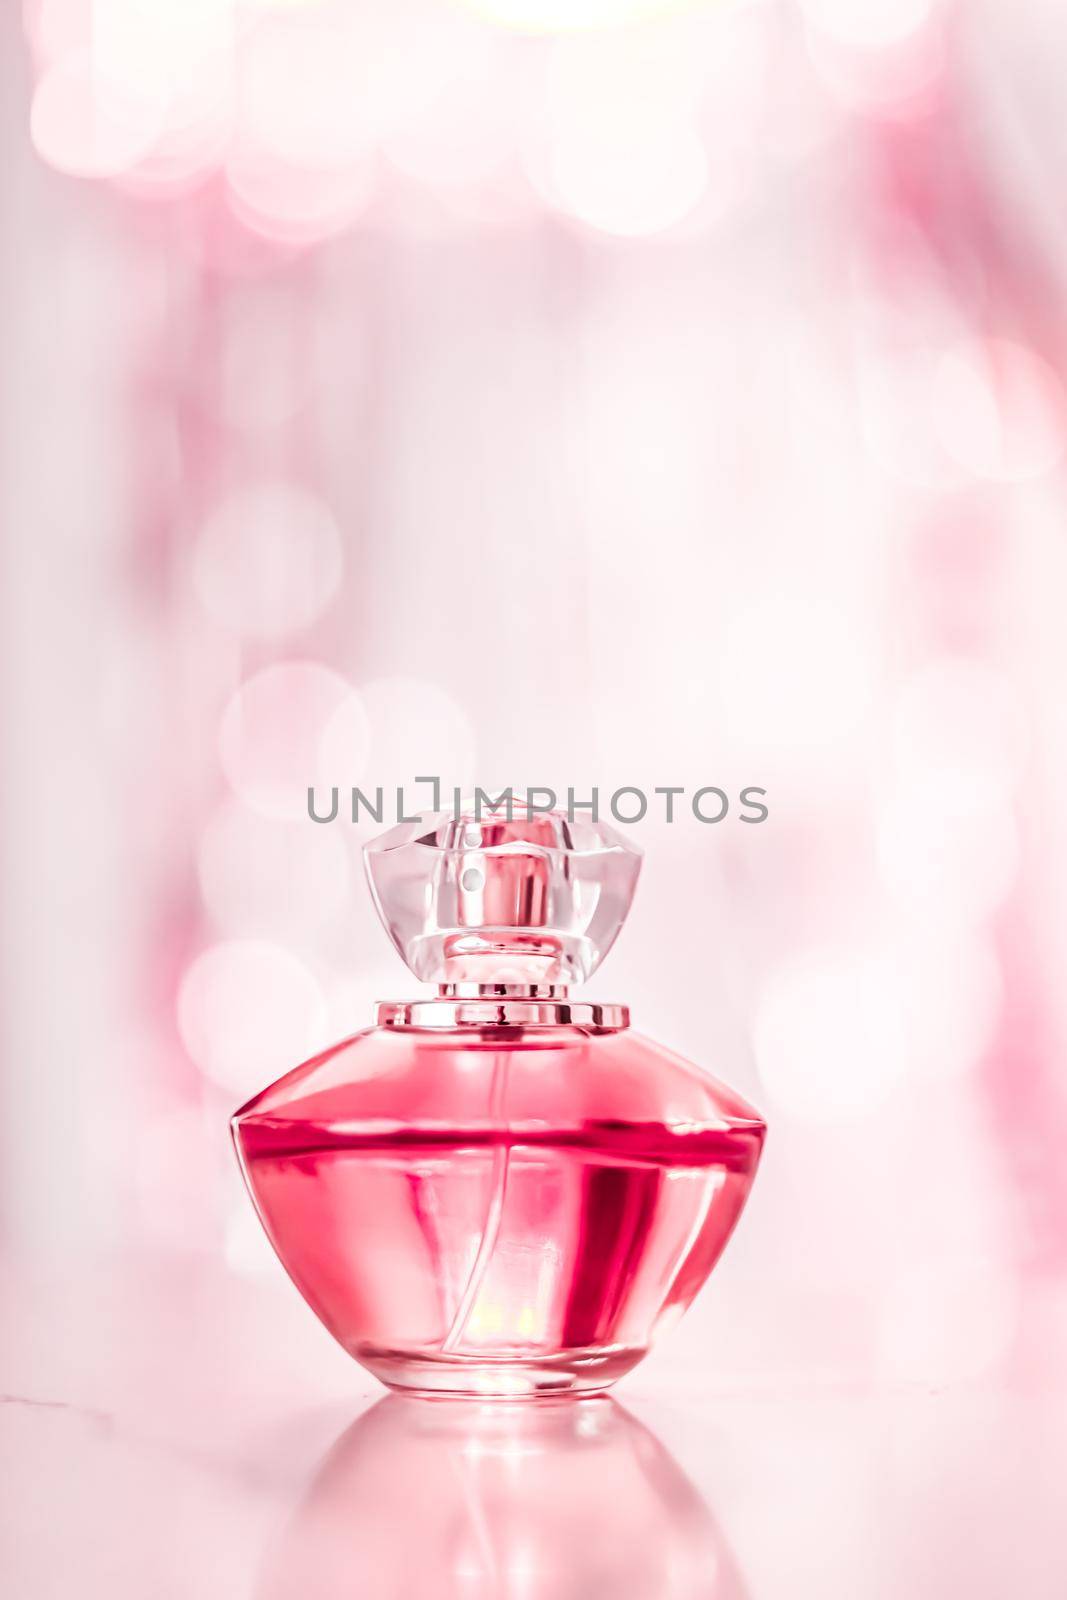 Perfume bottle on glamour background, floral feminine scent, fragrance and eau de parfum as luxury holiday gift, cosmetic and beauty brand present by Anneleven